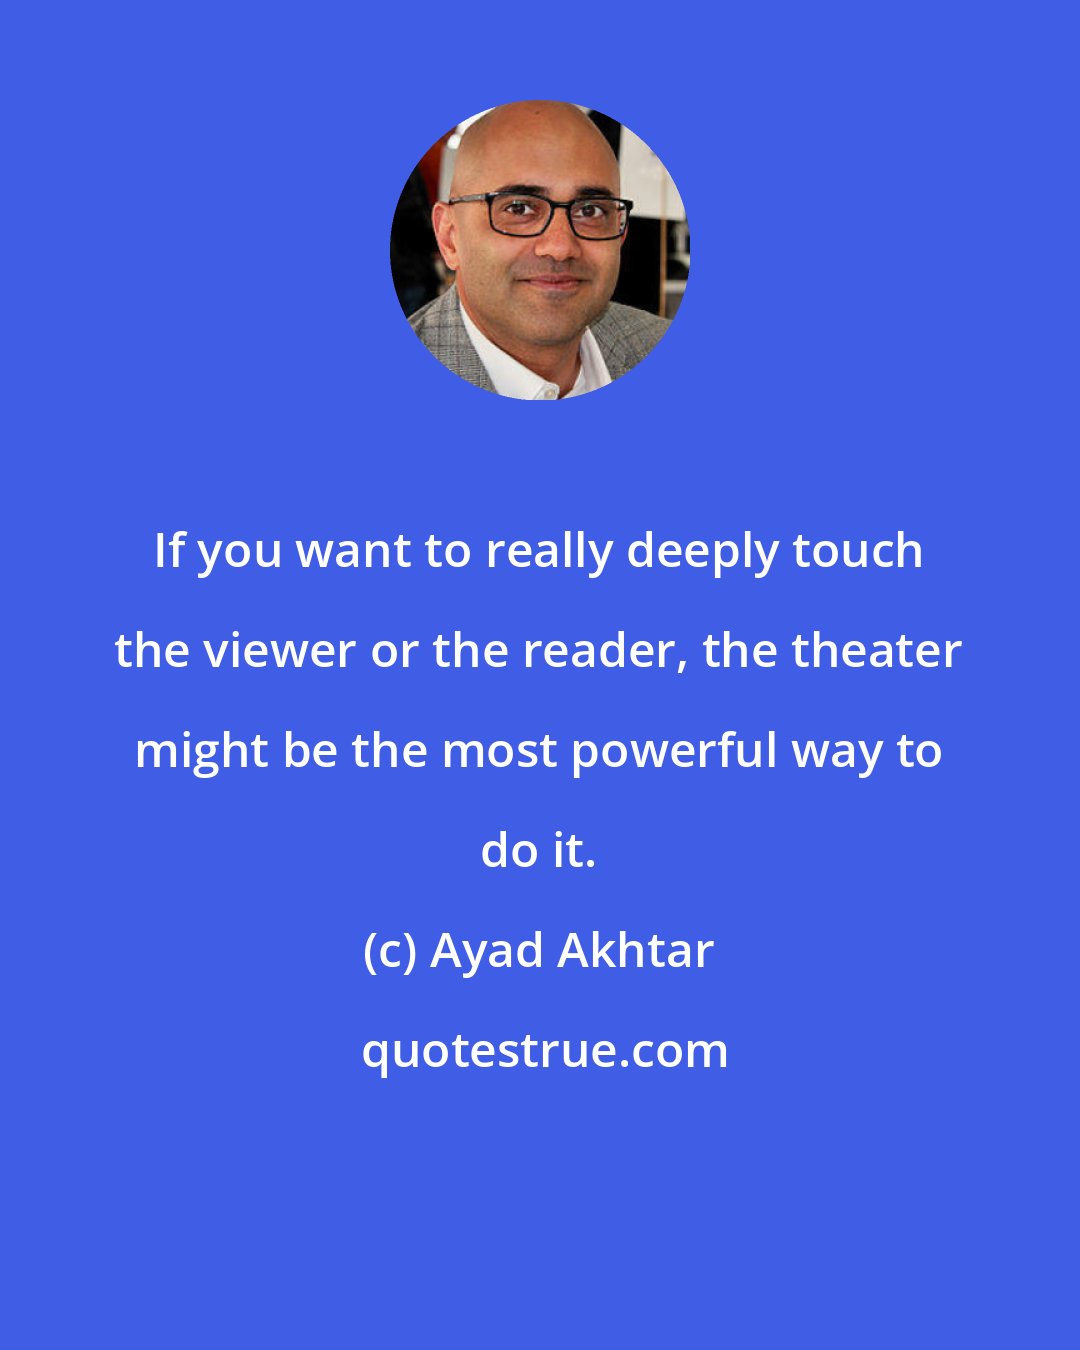 Ayad Akhtar: If you want to really deeply touch the viewer or the reader, the theater might be the most powerful way to do it.